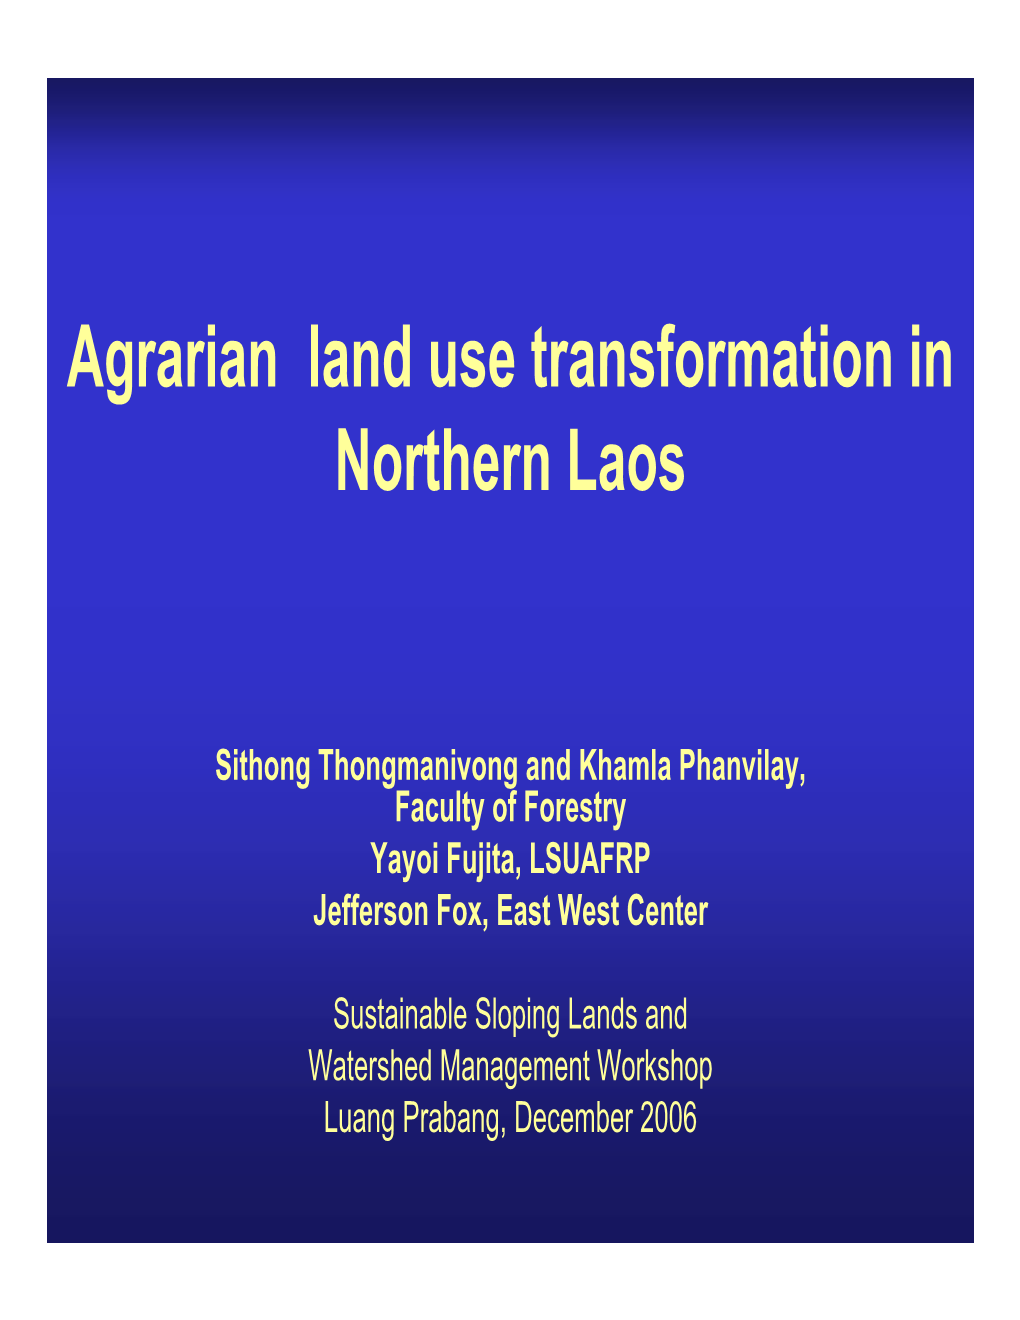 Agrarian Land Use Transformation in Northern Laos